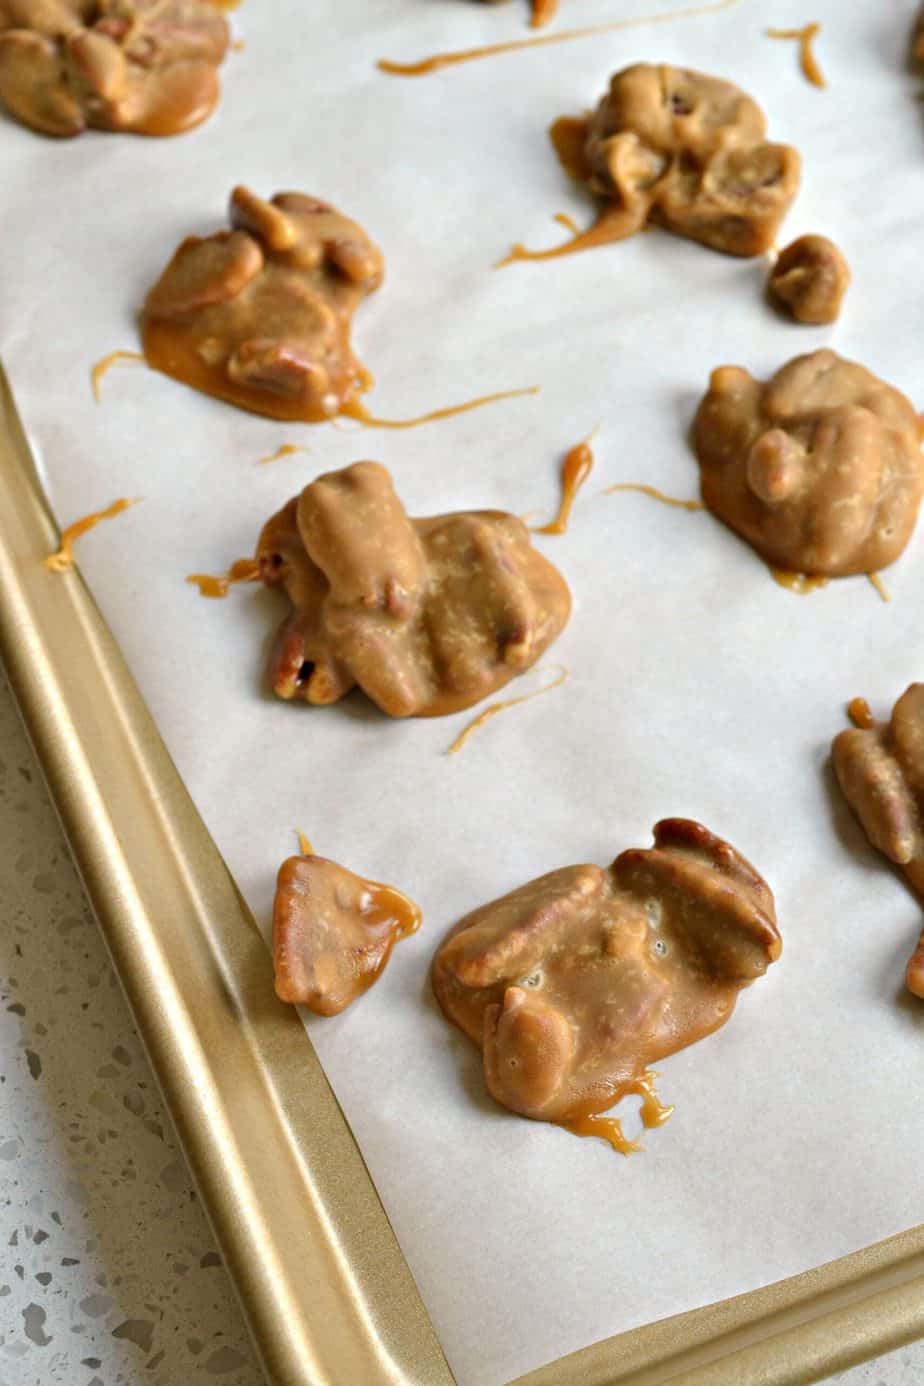 This scrumptious Southern Pecan Praline Recipe is made easy on the stovetop with six ingredients.